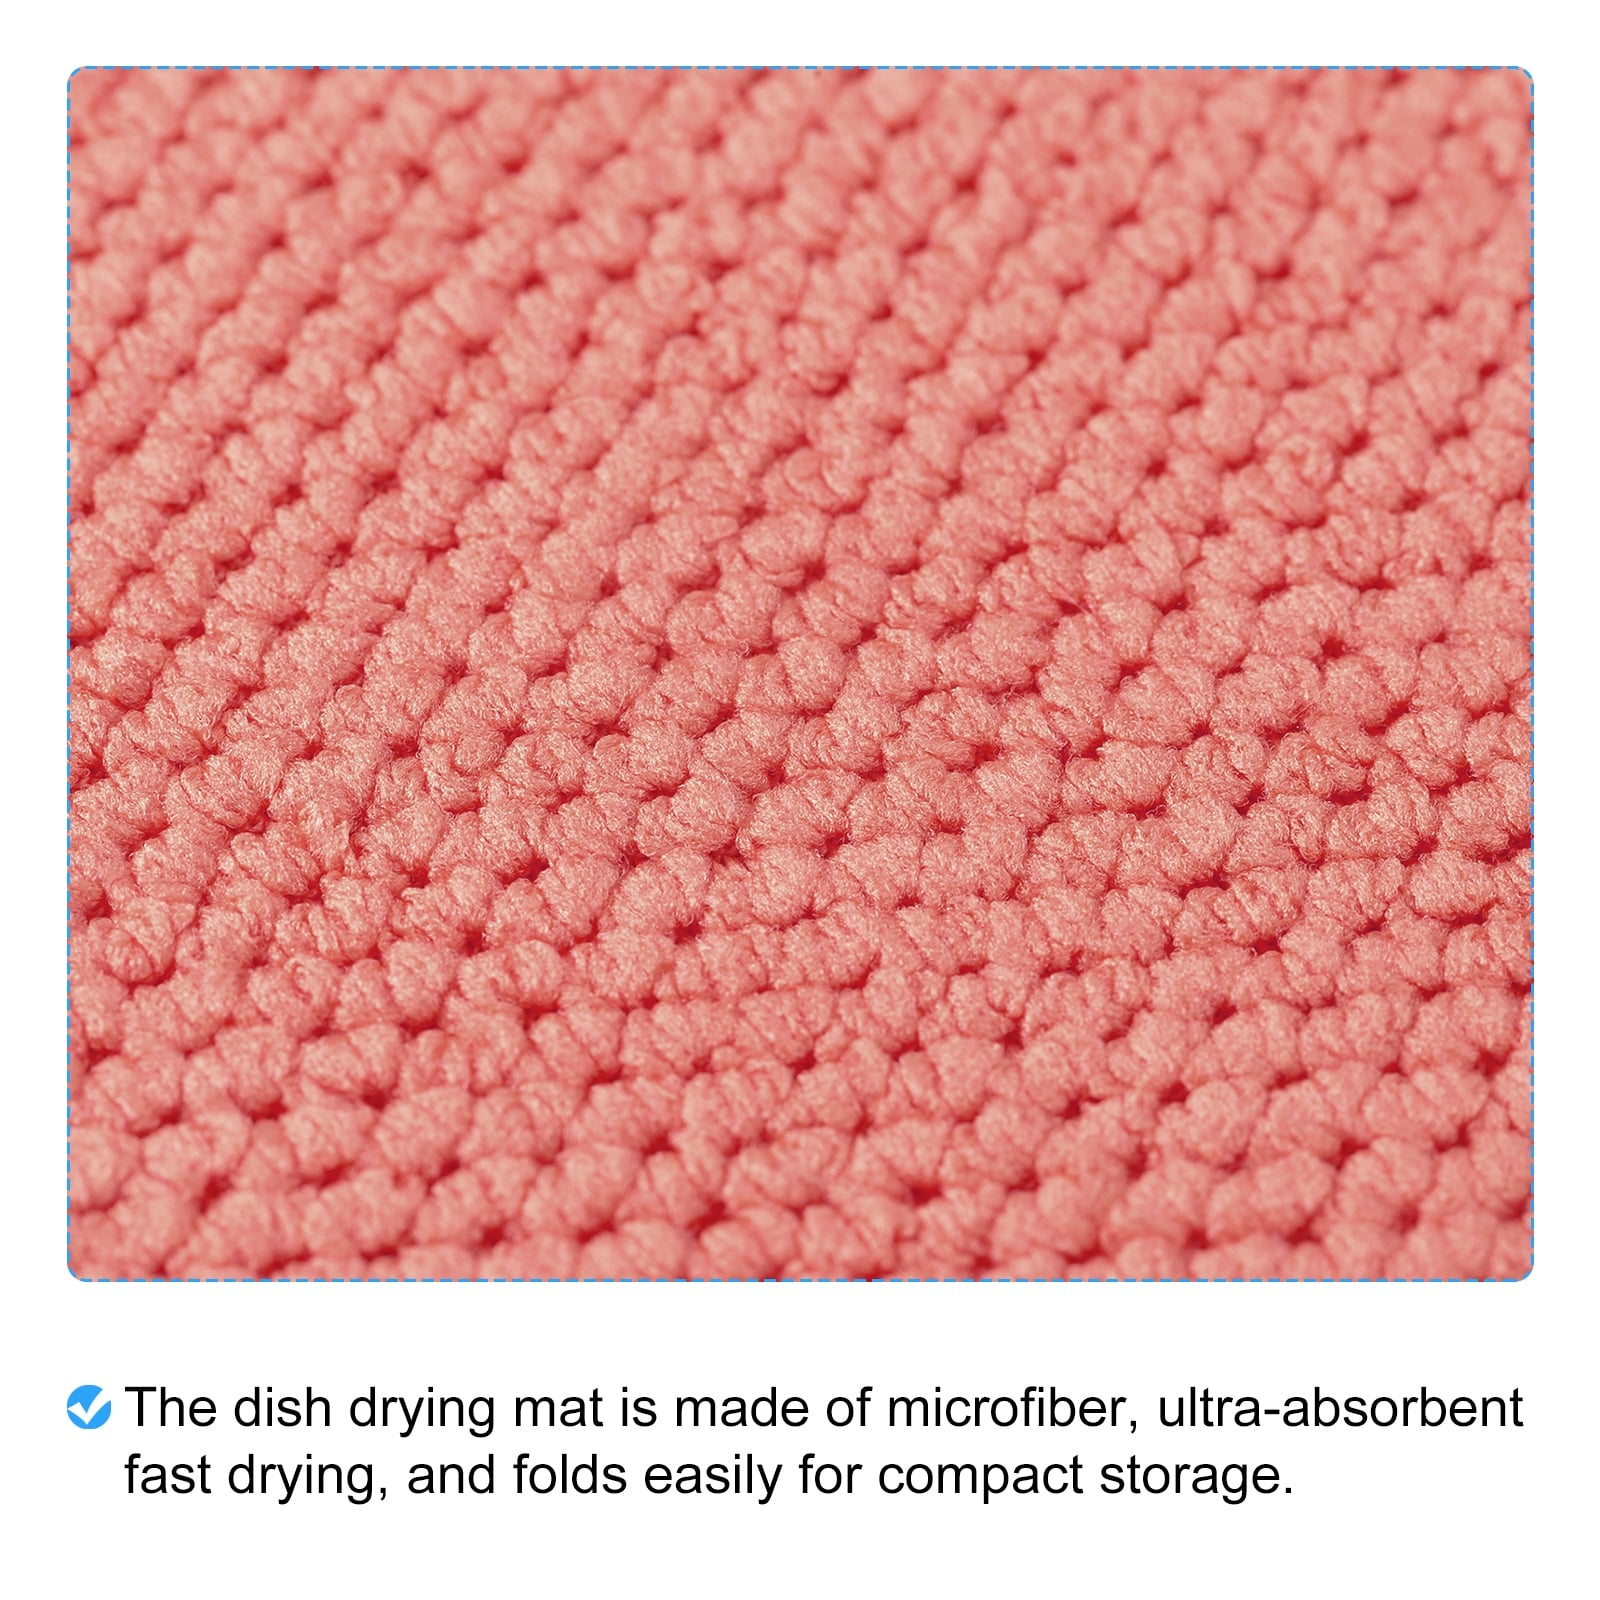 https://ak1.ostkcdn.com/images/products/is/images/direct/da051e2af7db95cfc6211db0f293676a63340b72/Microfiber-Dish-Drying-Mat%2C-15.75%22-x-11.82%22-Dishes-Drainer-Mats-Red.jpg